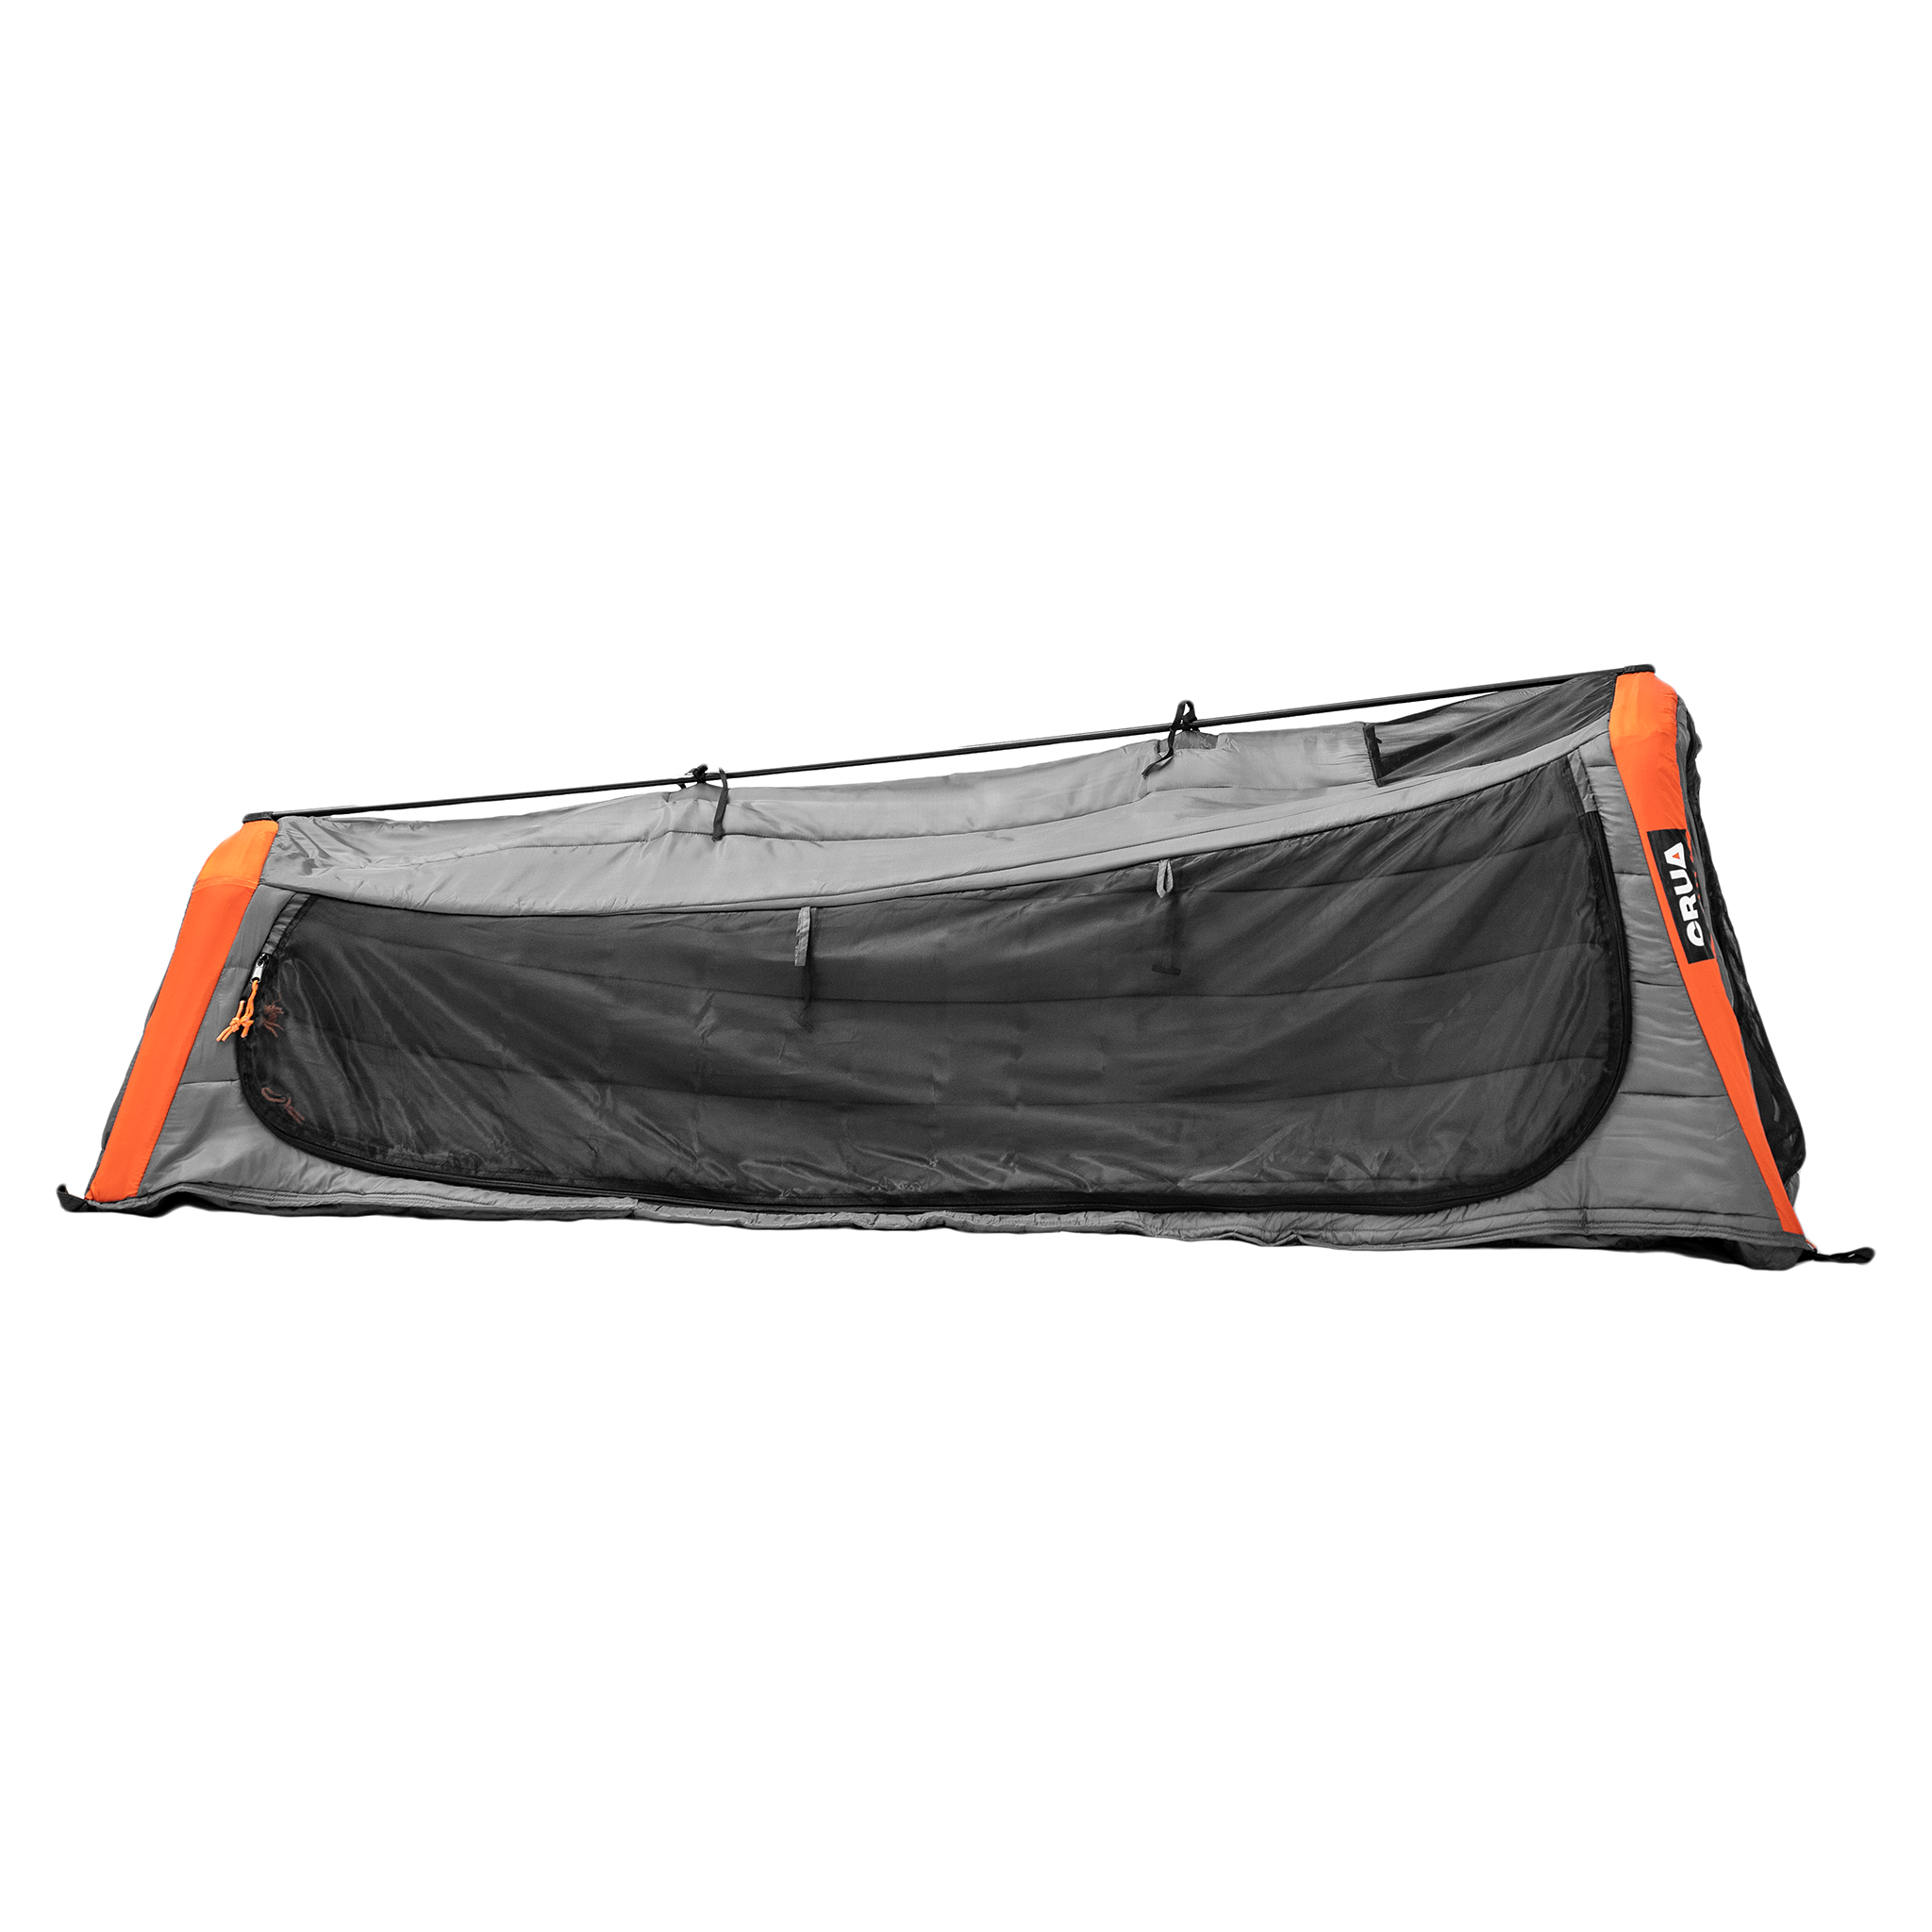 Crua Culla Haul - Rooftop Tent Inner Insulated Lining - Temperature, Noise  & Light Insulated Tent